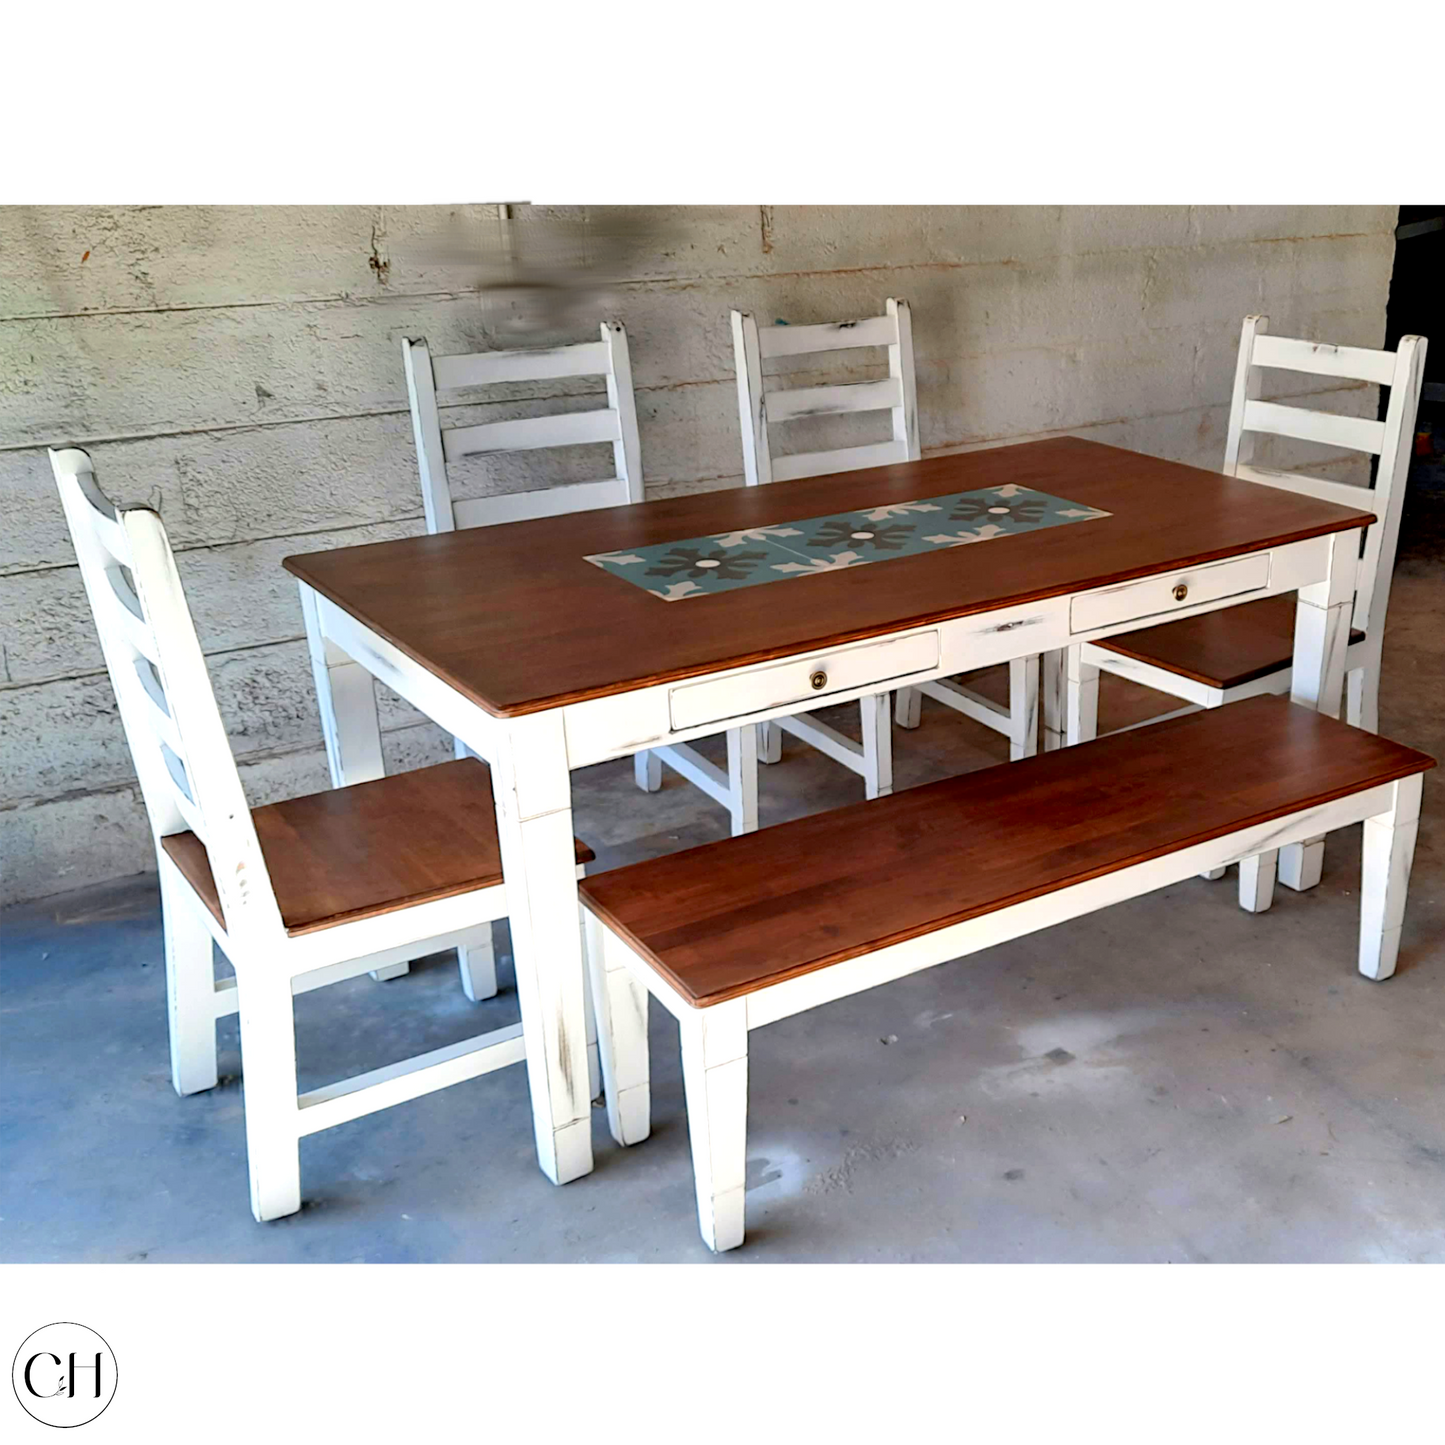 CustHum-Geranium-6 seater dining set, 4 chairs, 1 bench, cutlery drawers on table apron and embedded tiles on top (factory background)